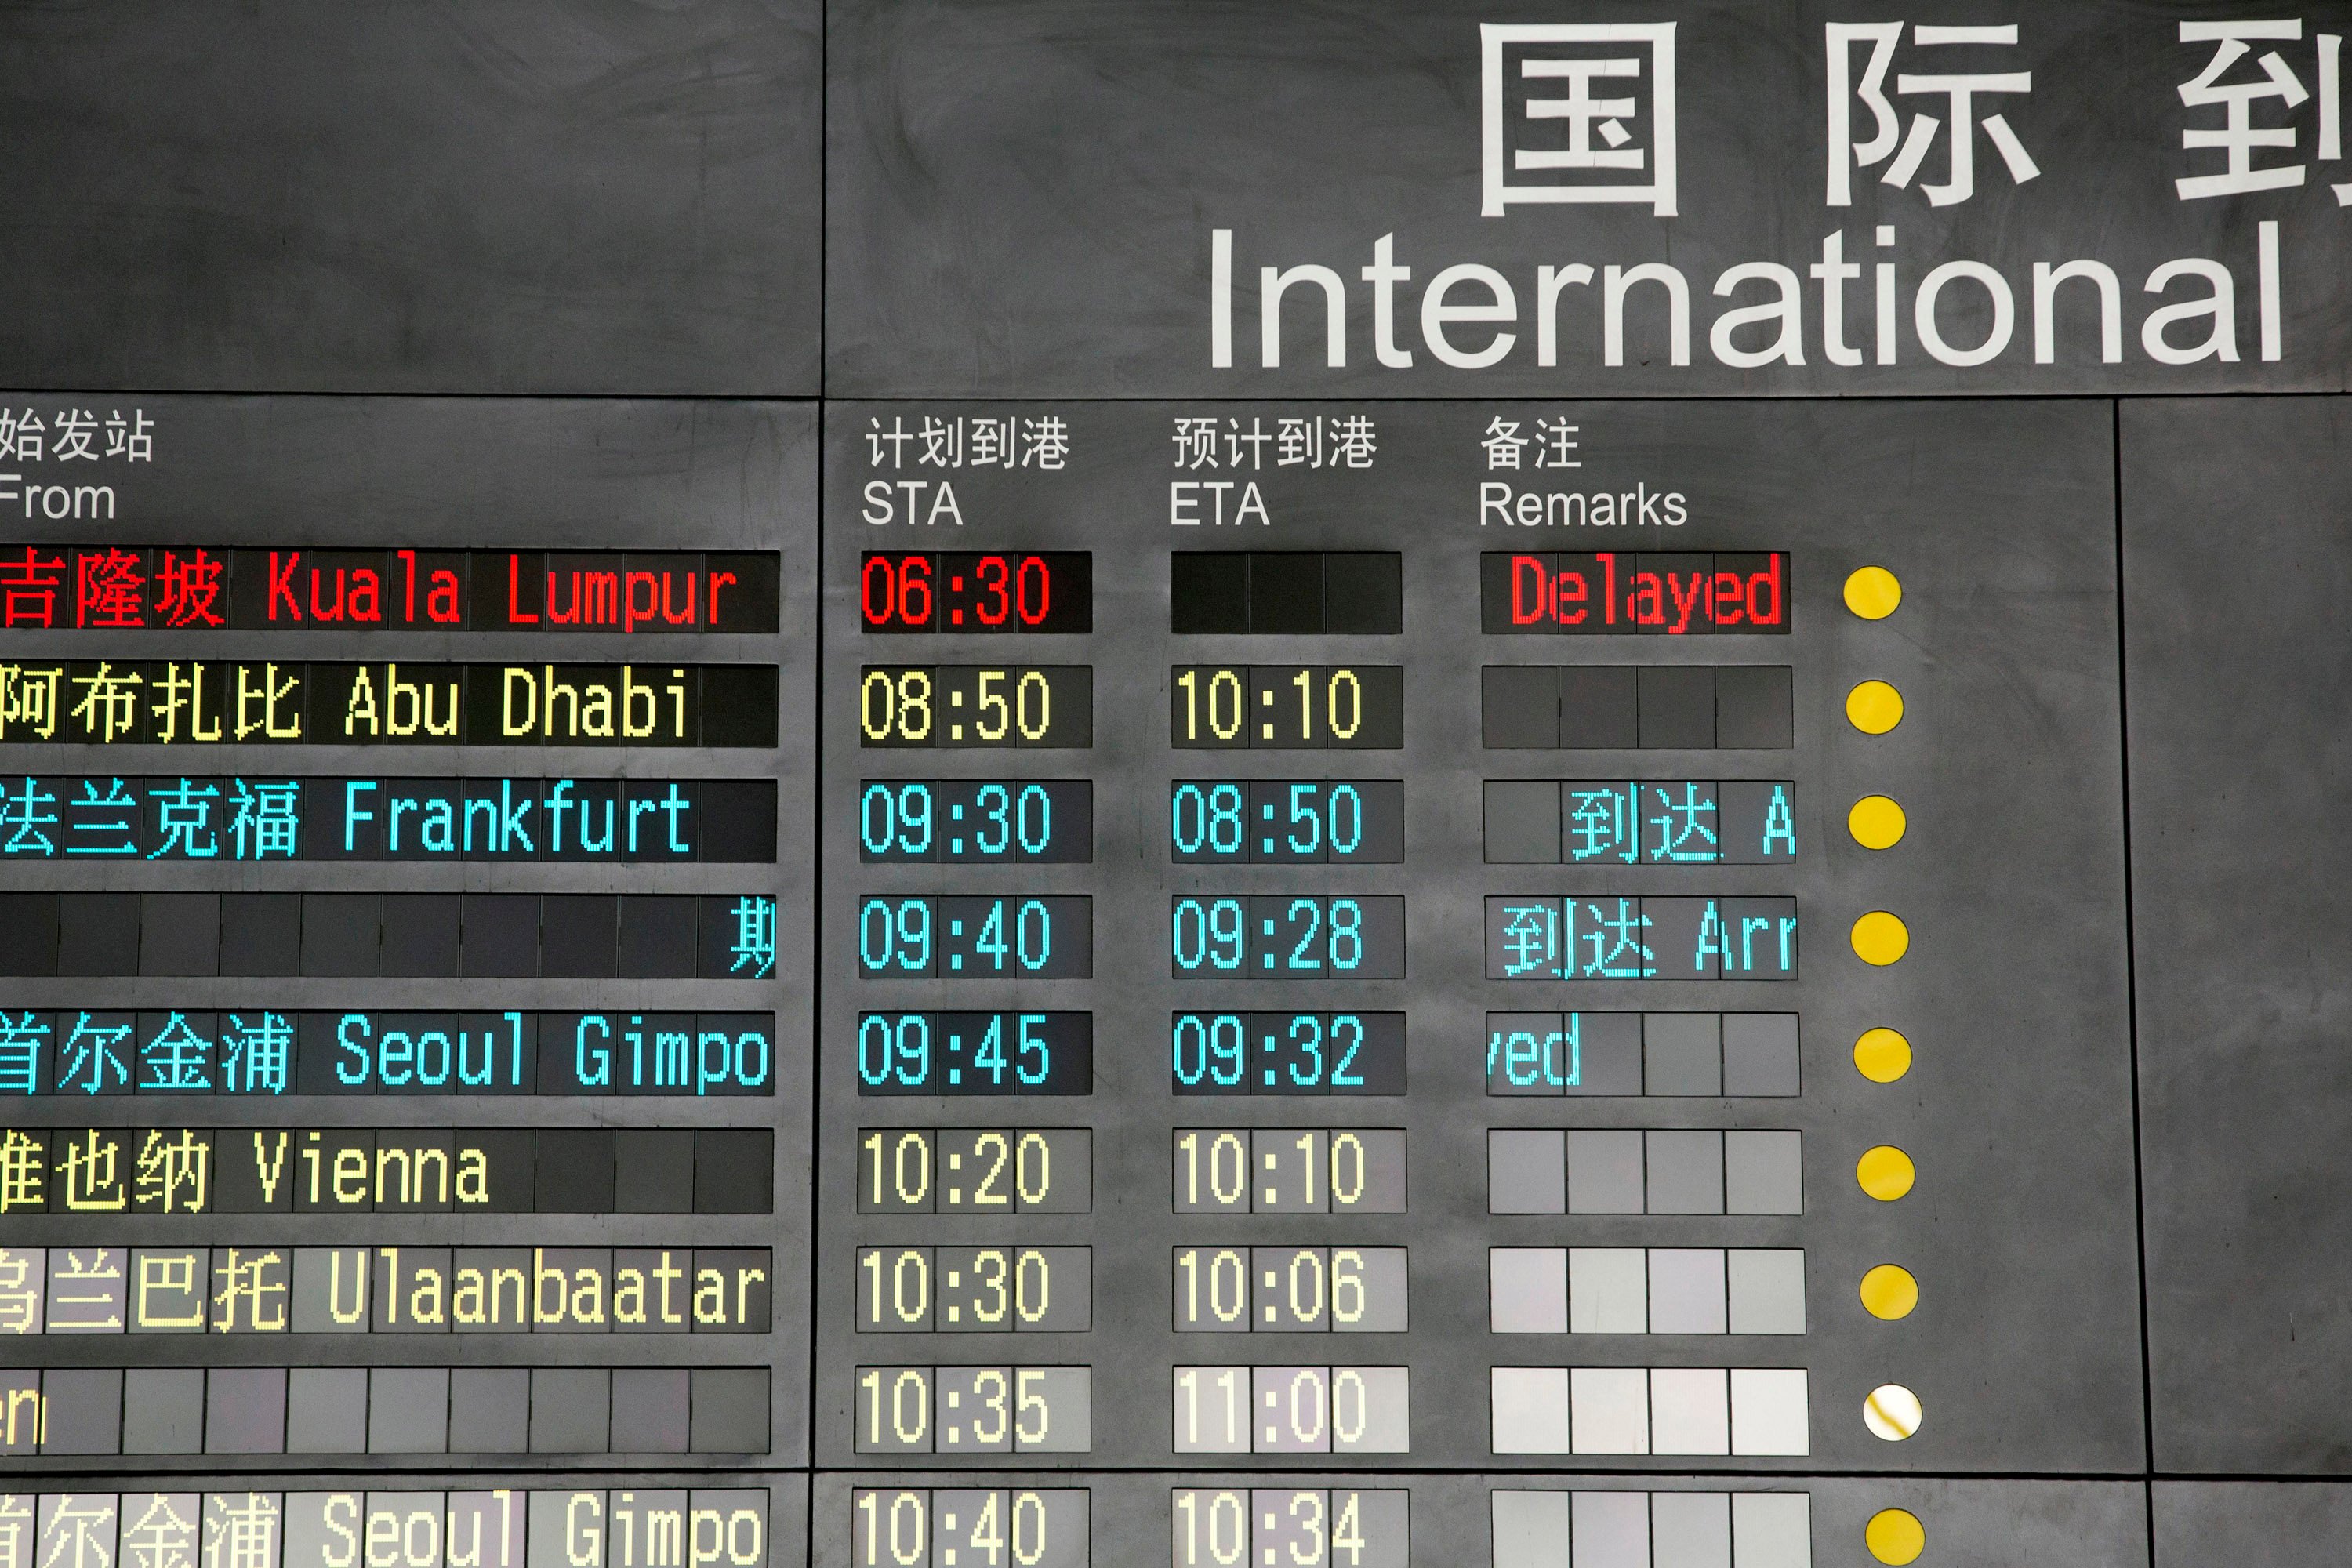 The arrival board at the International Airport in Beijing, China, shows a Malaysian airliner delayed on March 8, 2014. Photo: AP